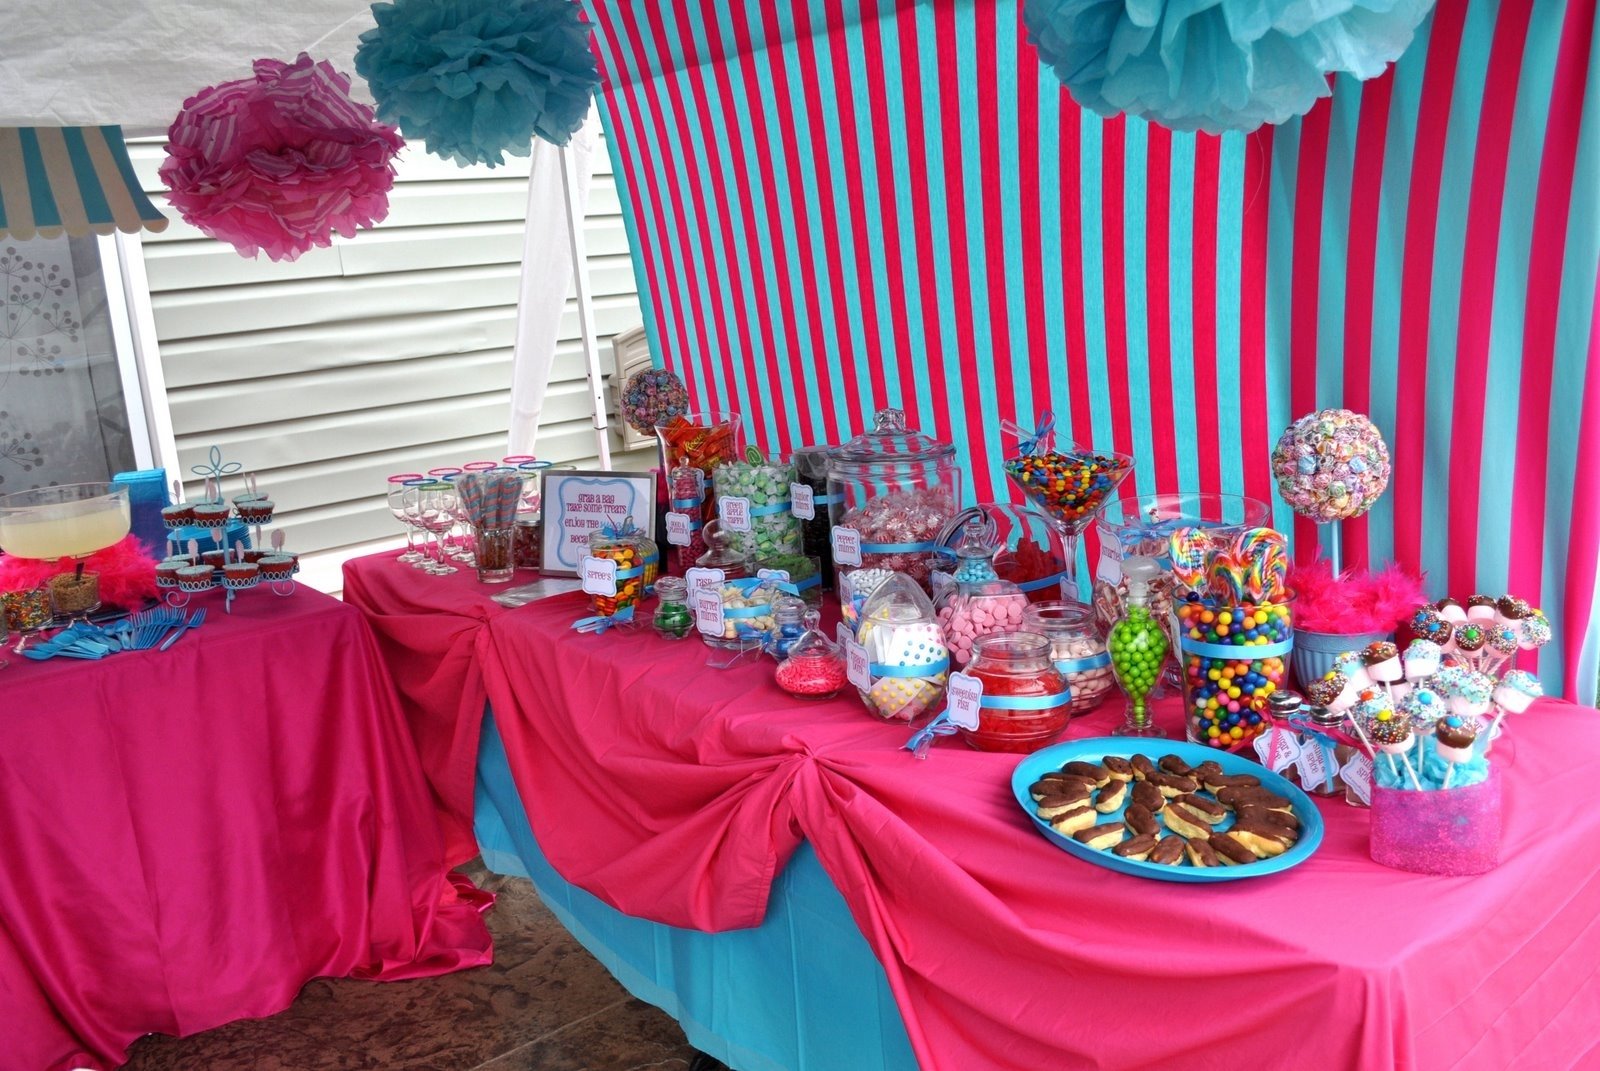 10 Stylish Candy Ideas For Candy Buffet masquerade party ideas candy buffet dollar store crafts 2022